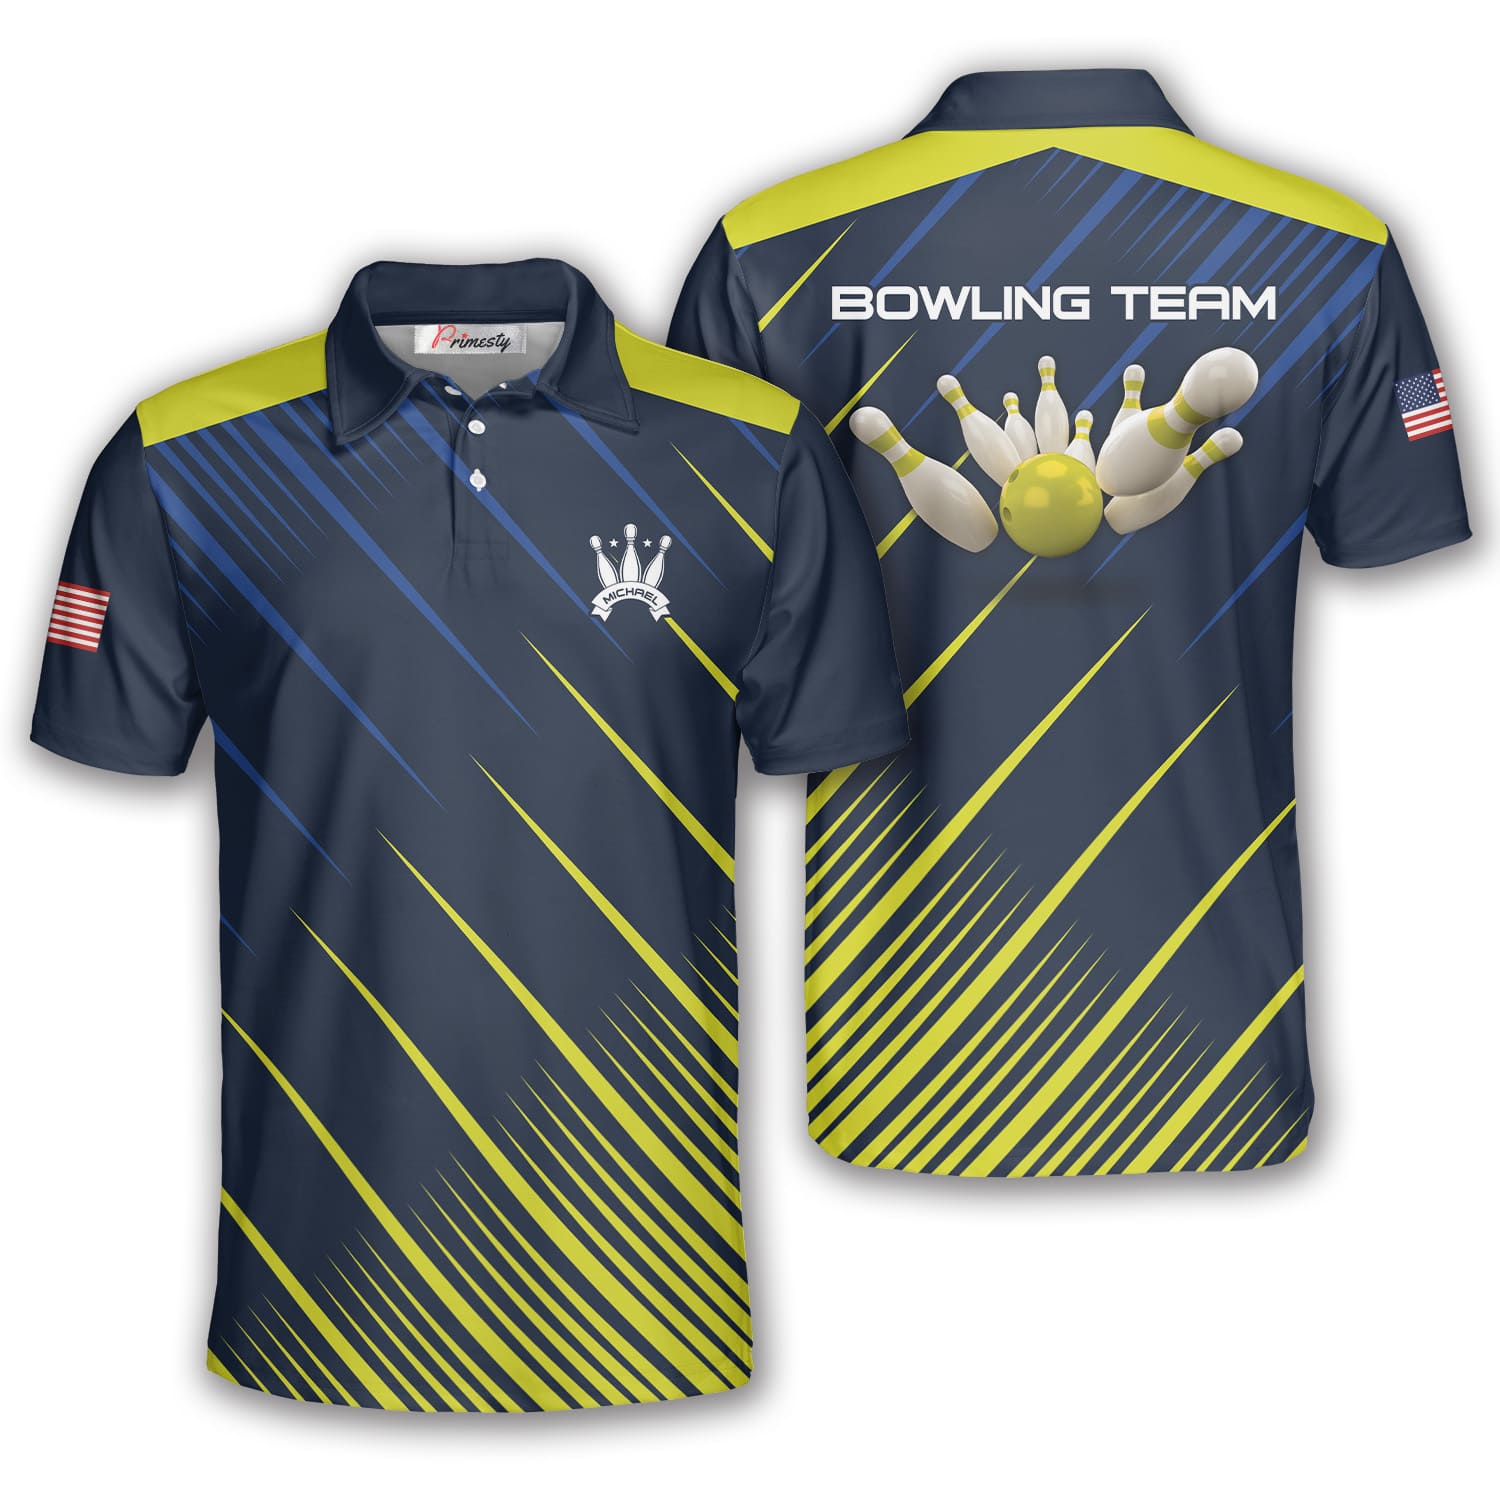 Basic Sporty Gold And Navy Custom Bowling Shirts For Men - Primesty